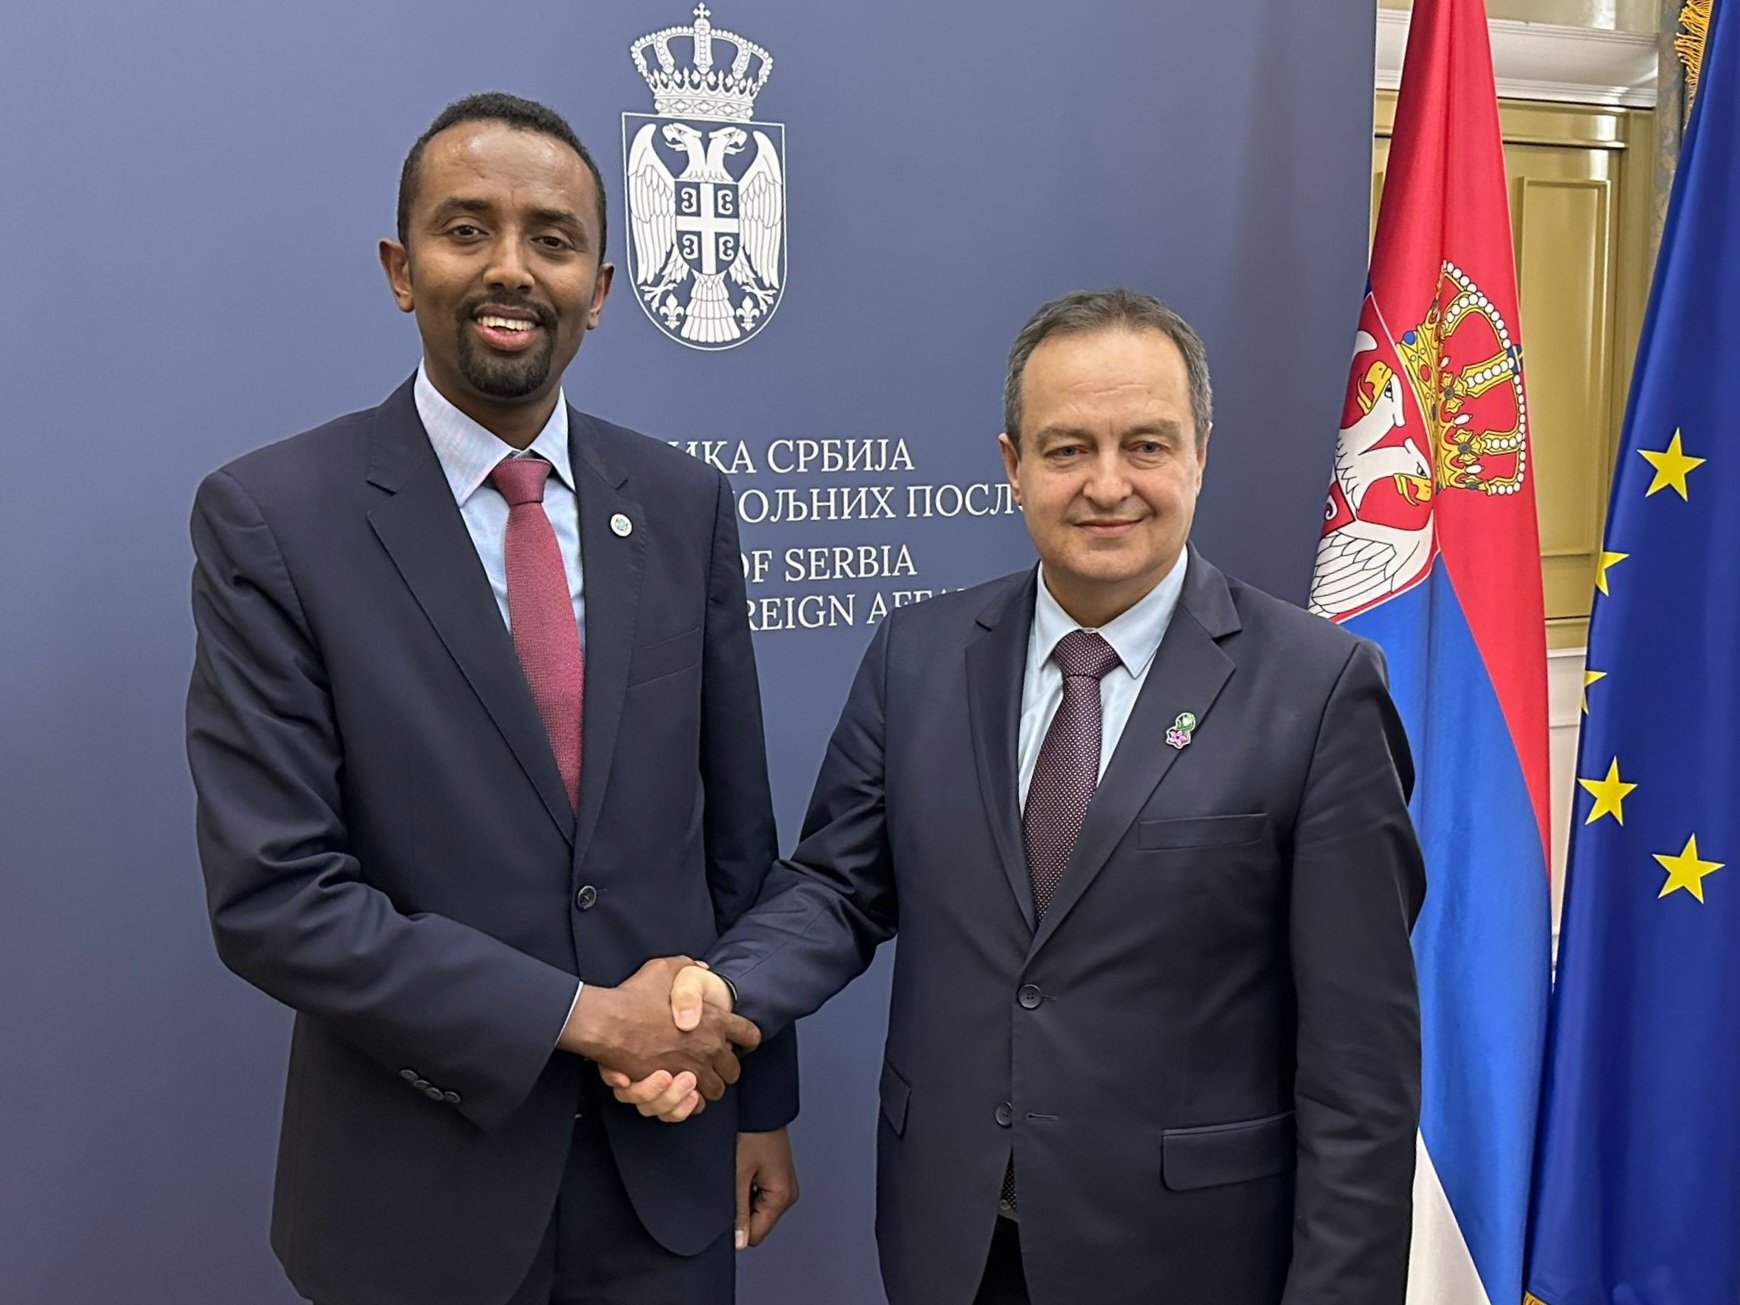 Somalia's Foreign Affairs Minister had a special meeting with the Minister of Economy of the Republic of Serbia, Rade Basta